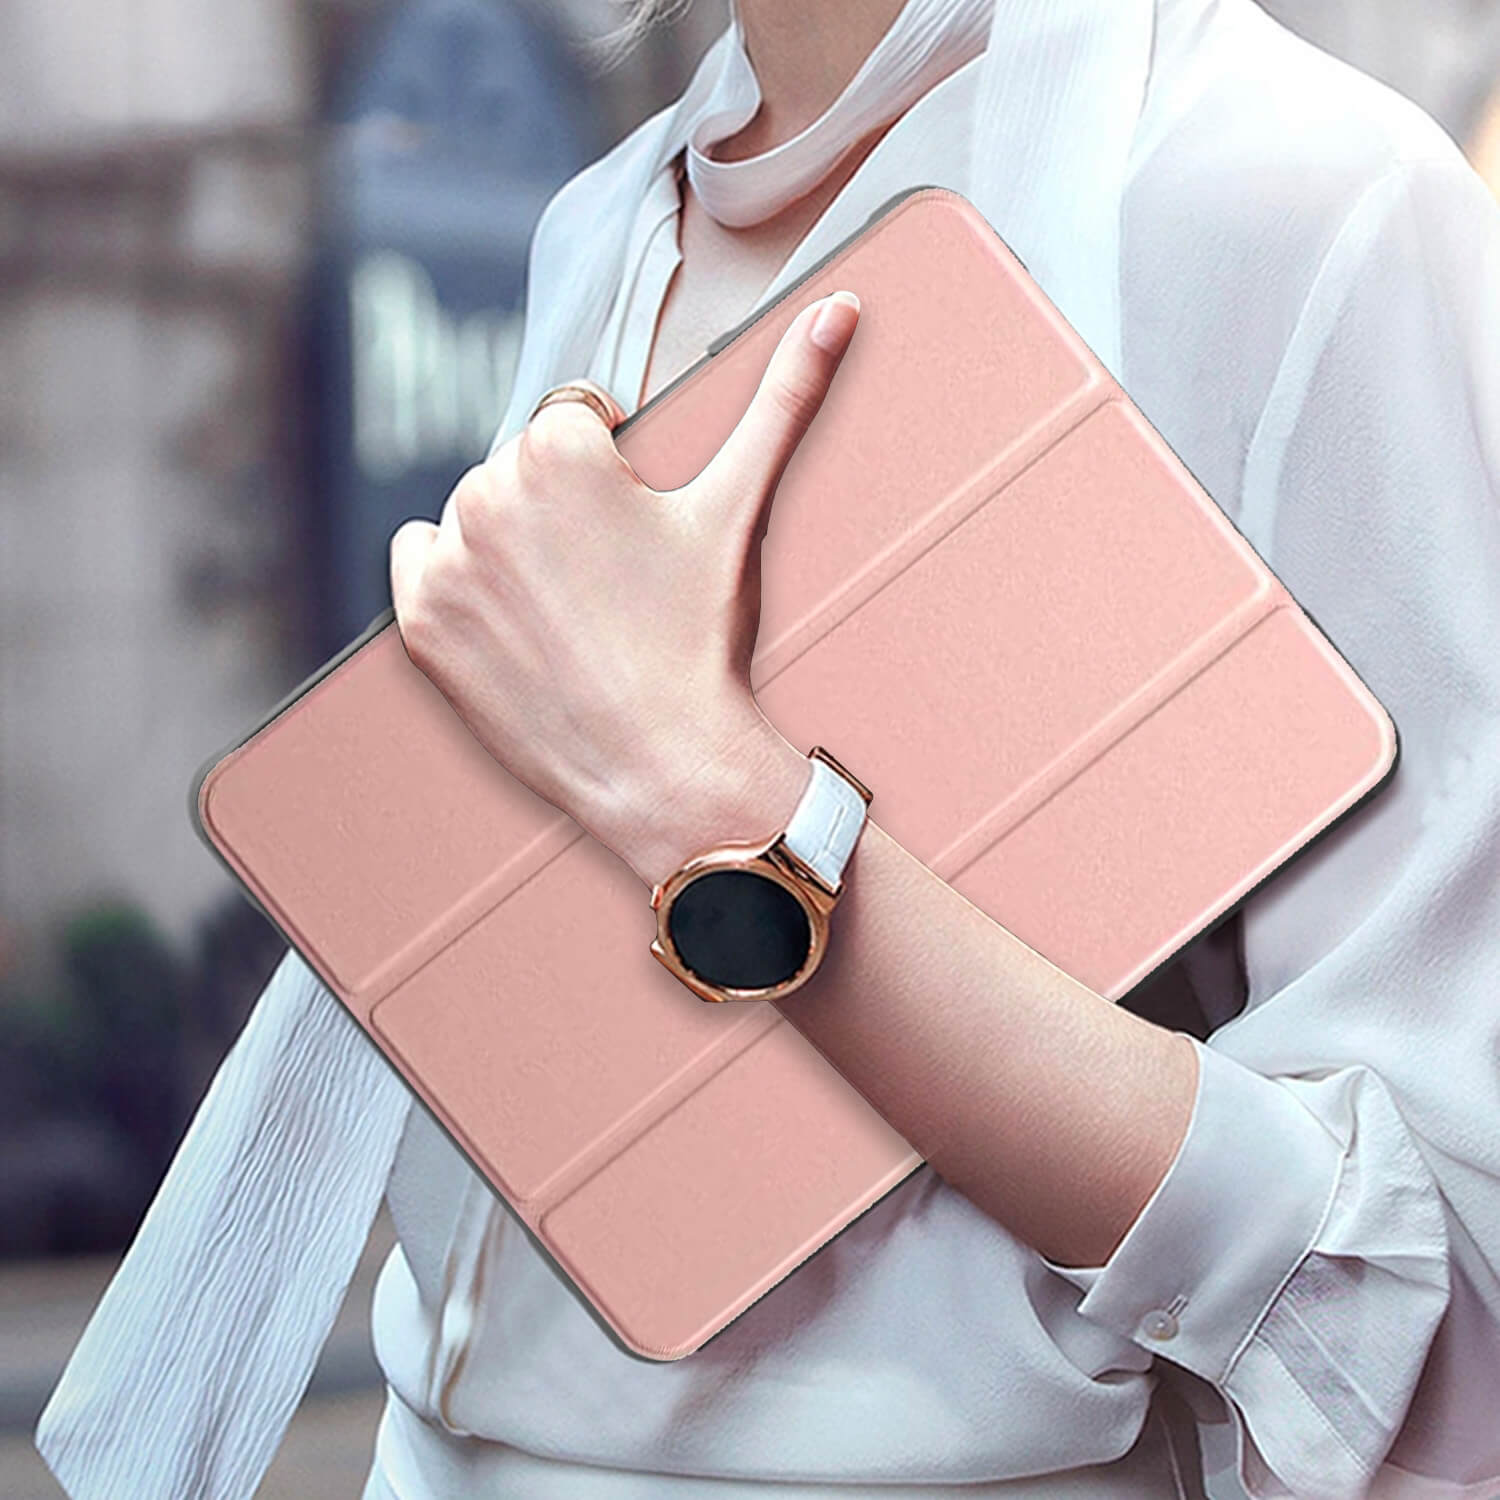 Tough On iPad 7 / 8 / 9th Gen 10.2" Case Smart Cover Rose Gold with Clear Back